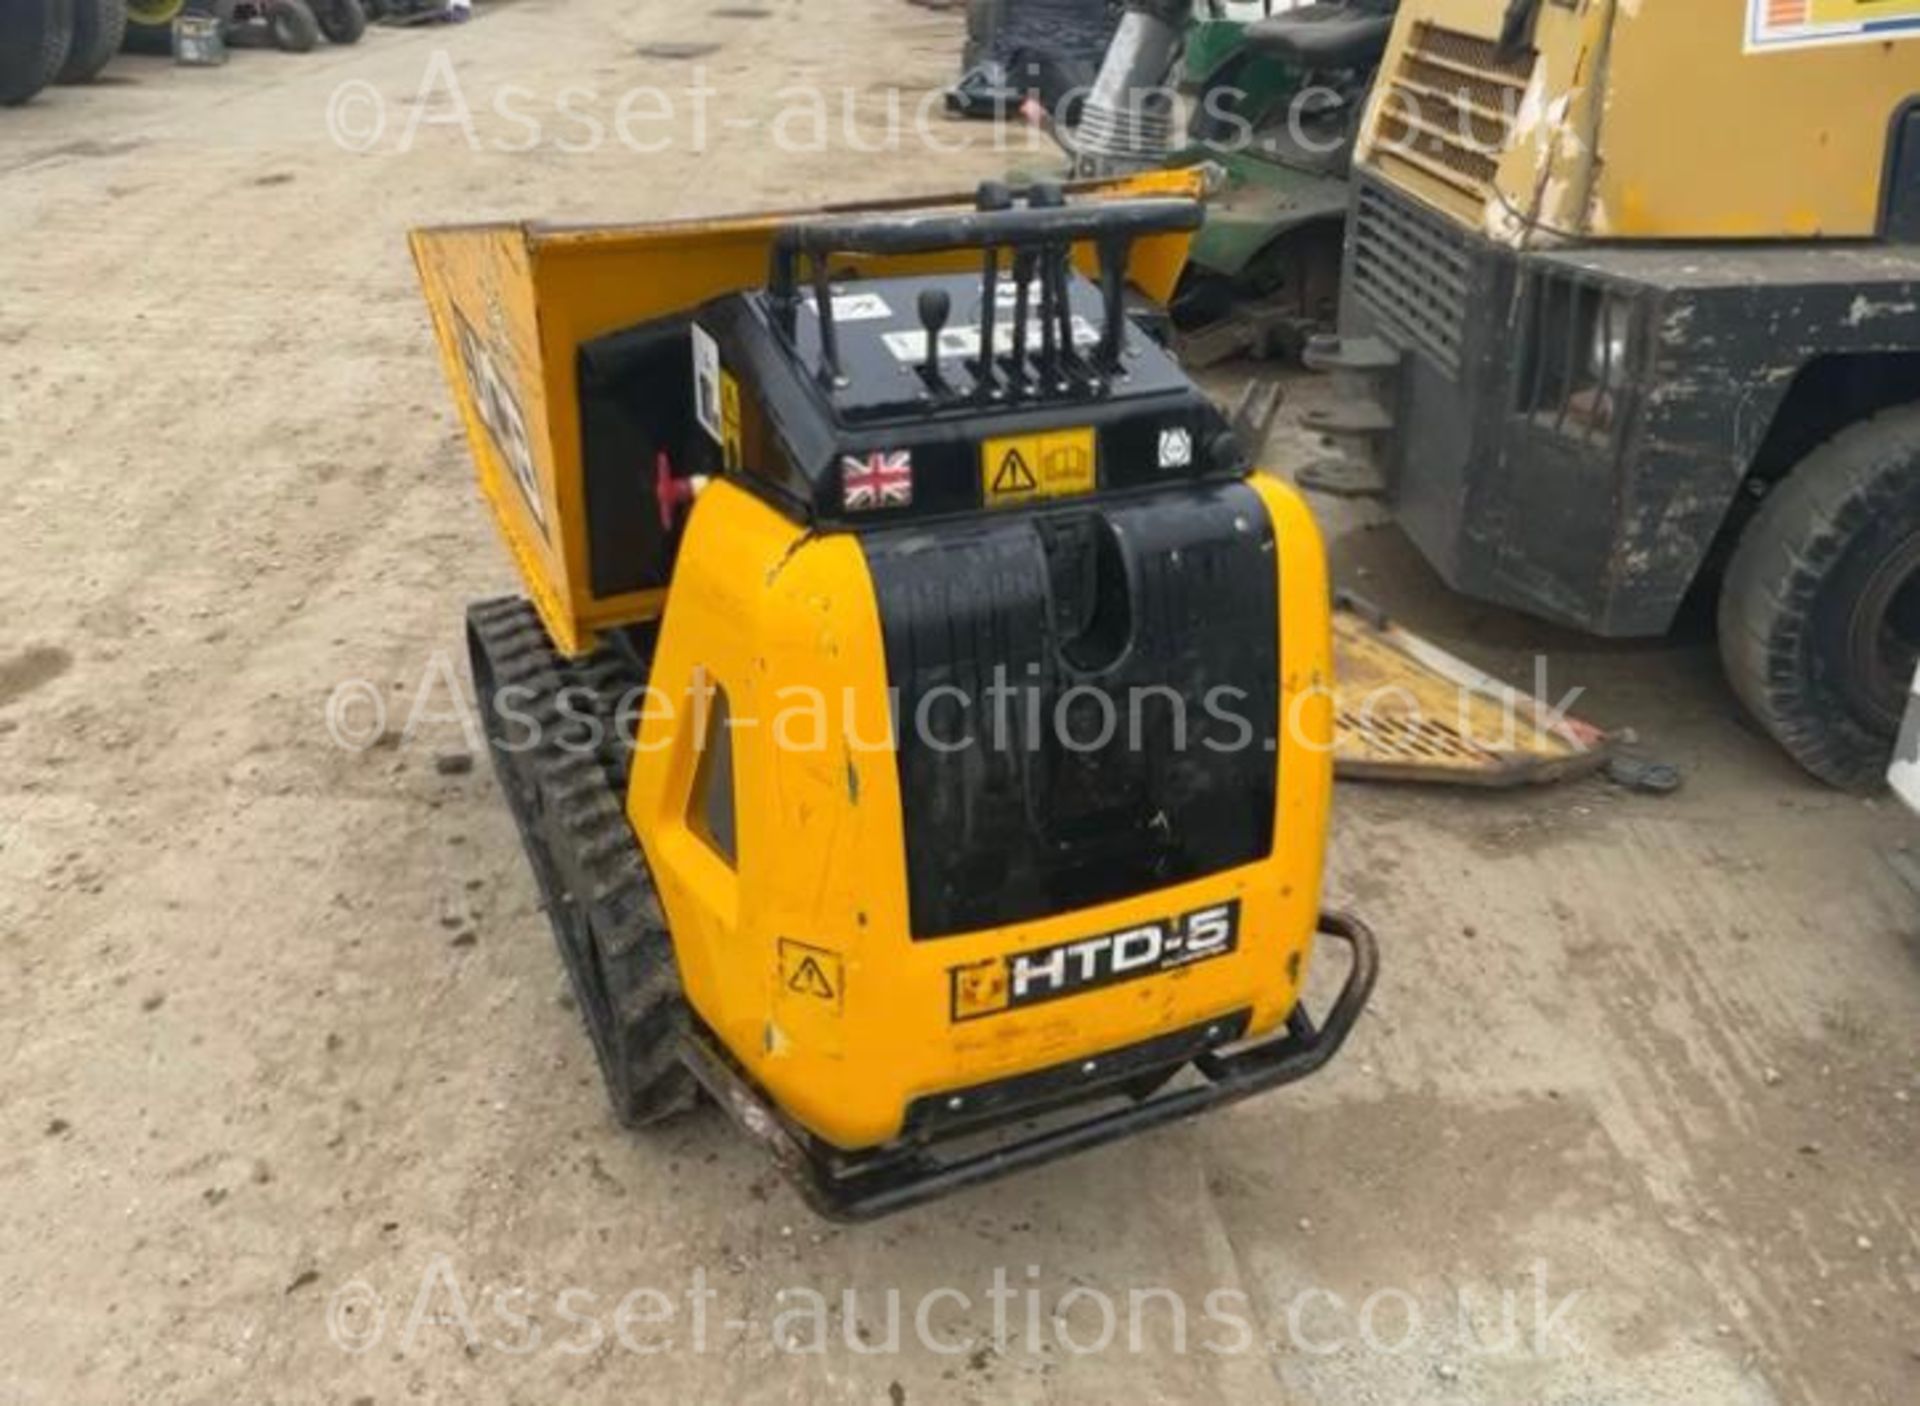 2019 JCB HTD-5 DIESEL TRACKED DUMPER, RUNS DRIVES AND WORKS WELL, ELECTRIC OR PULL START *PLUS VAT* - Image 4 of 10